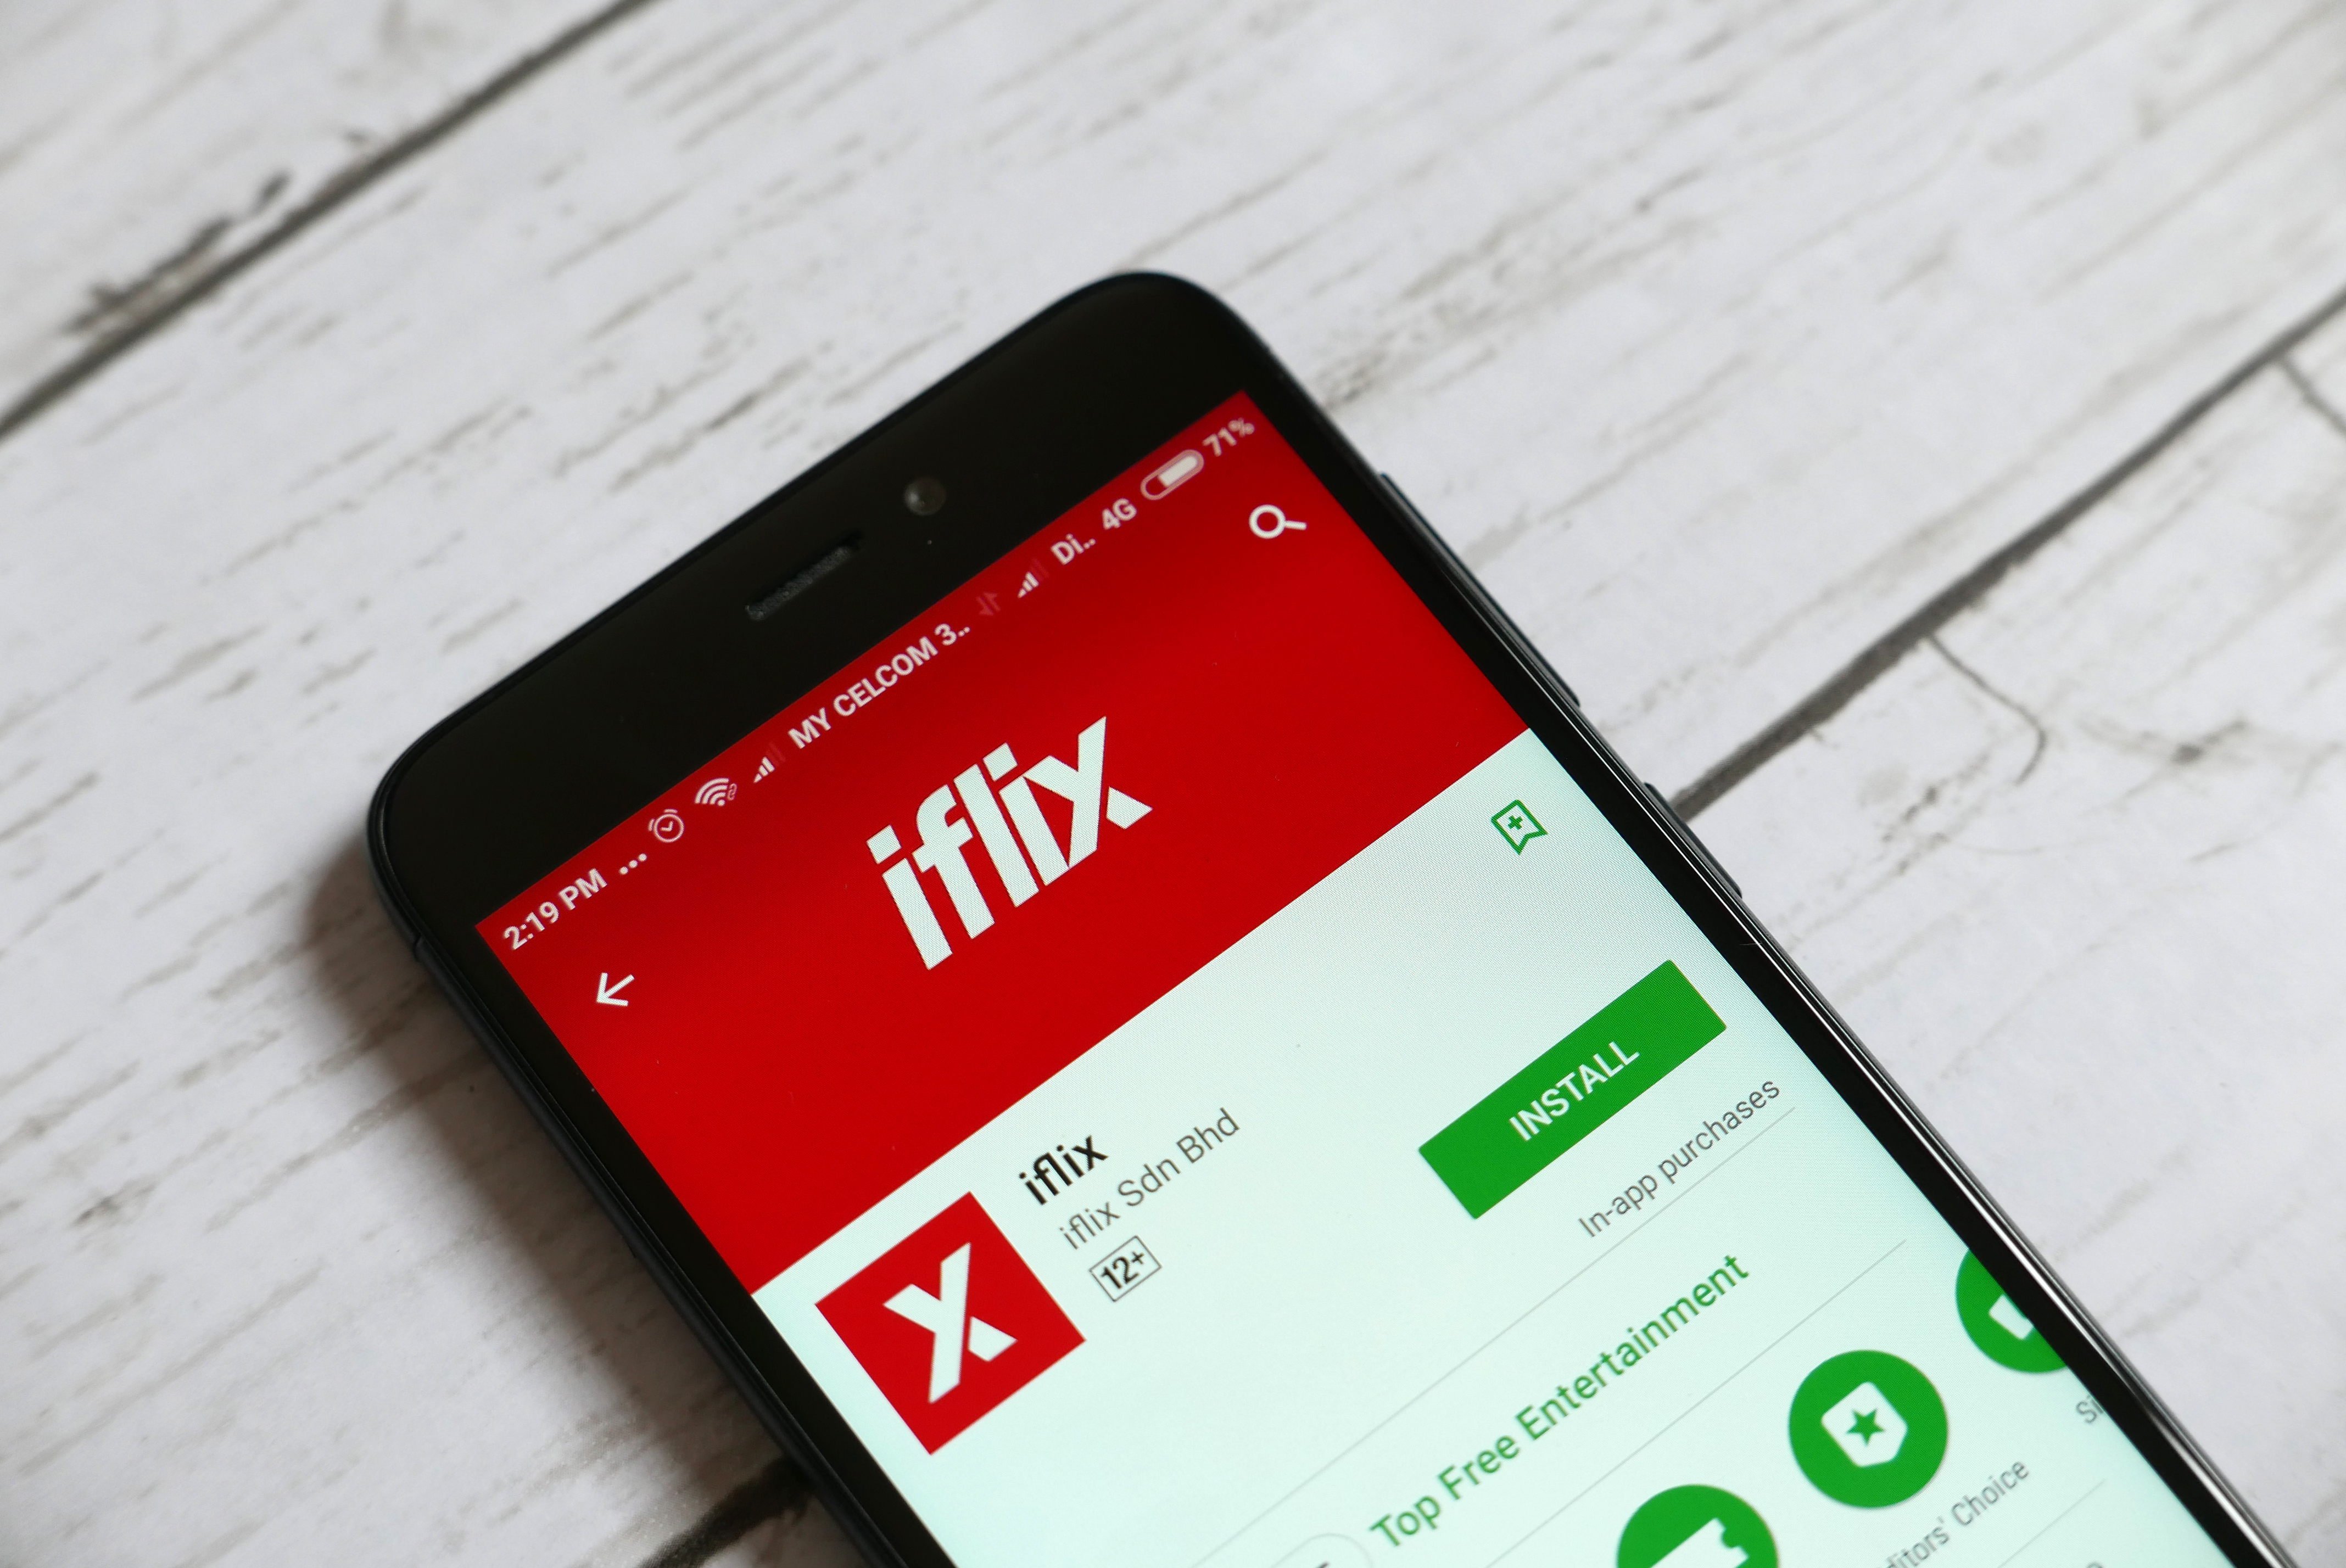 Iflix Movies Tv Series 4 1 0 603590290 Download Android Apk Aptoide